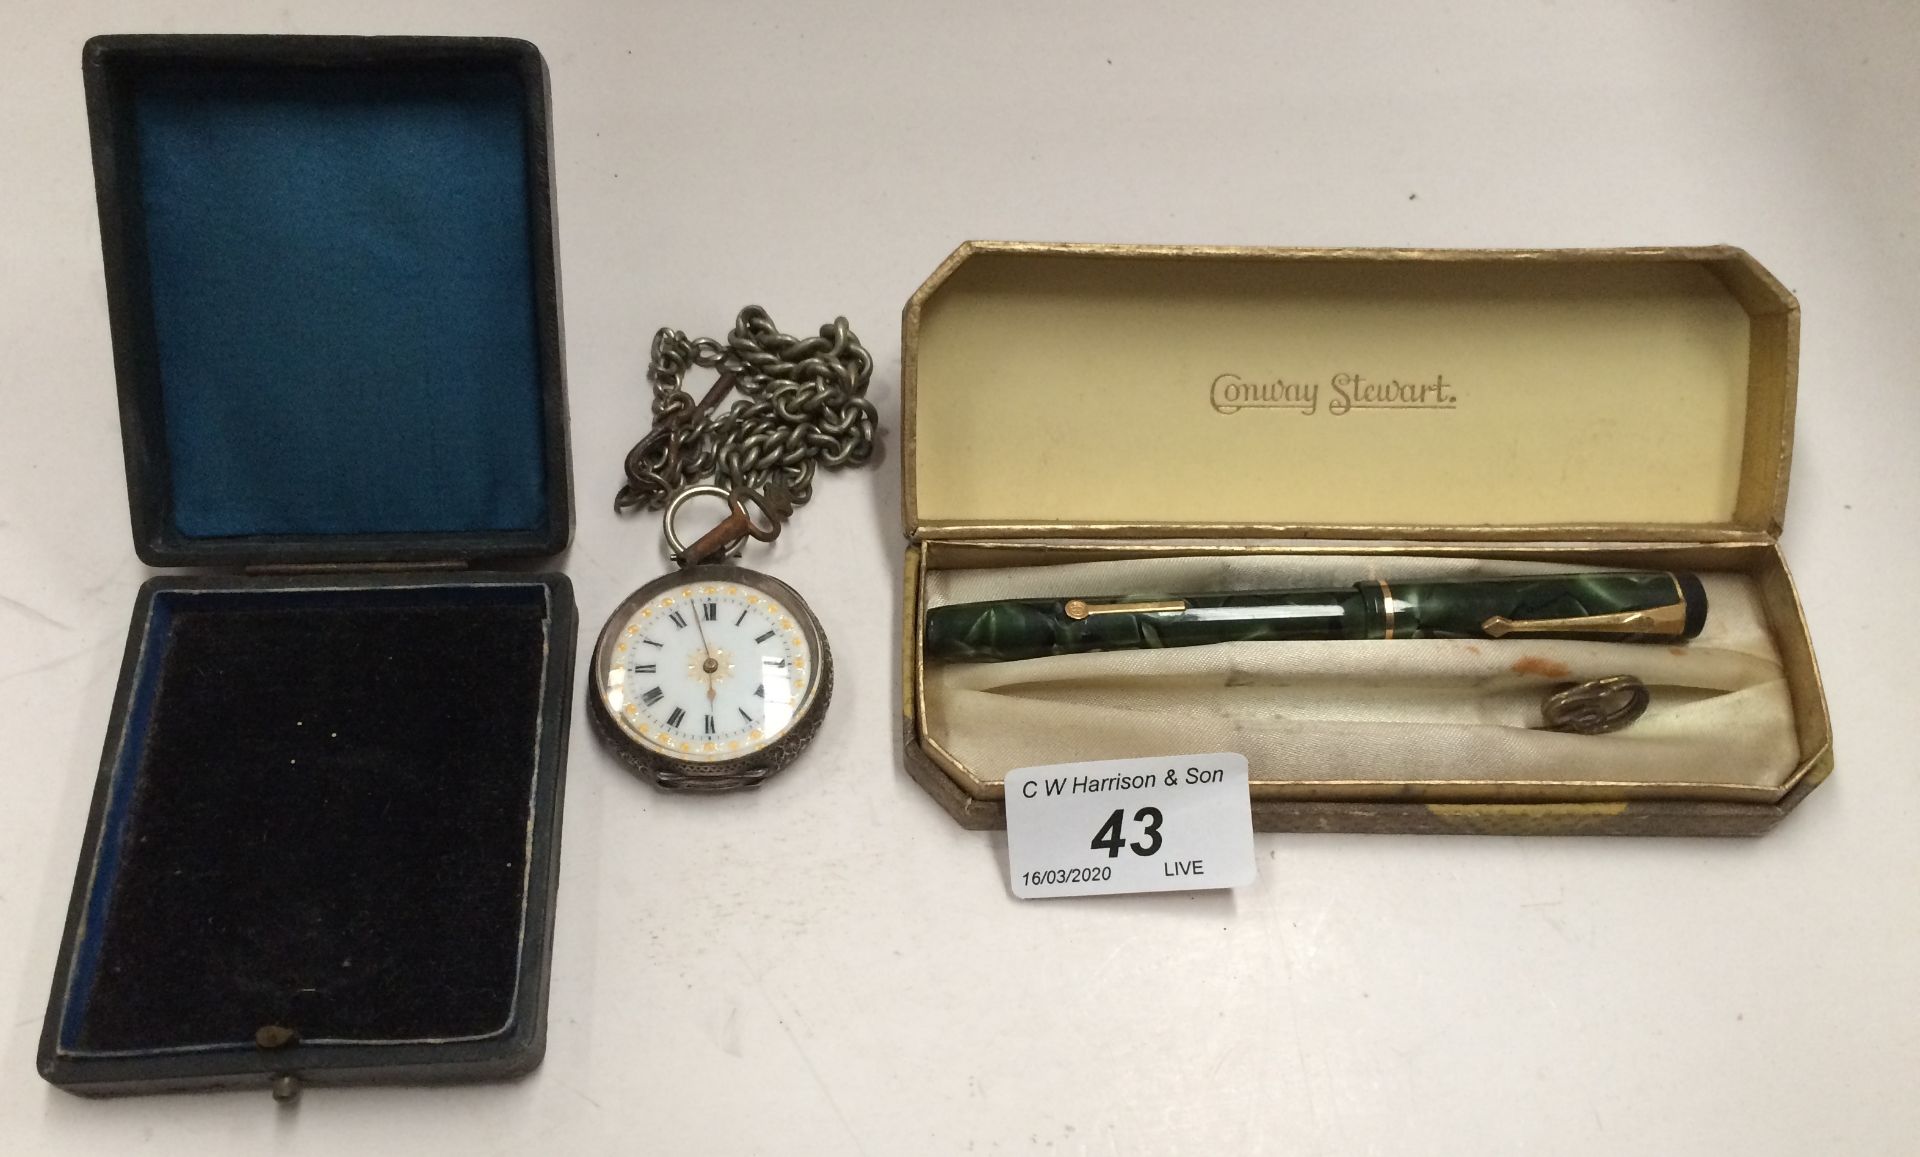 An engraved silver cased pocket watch with chain and a Conway Stewart fountain pen in case